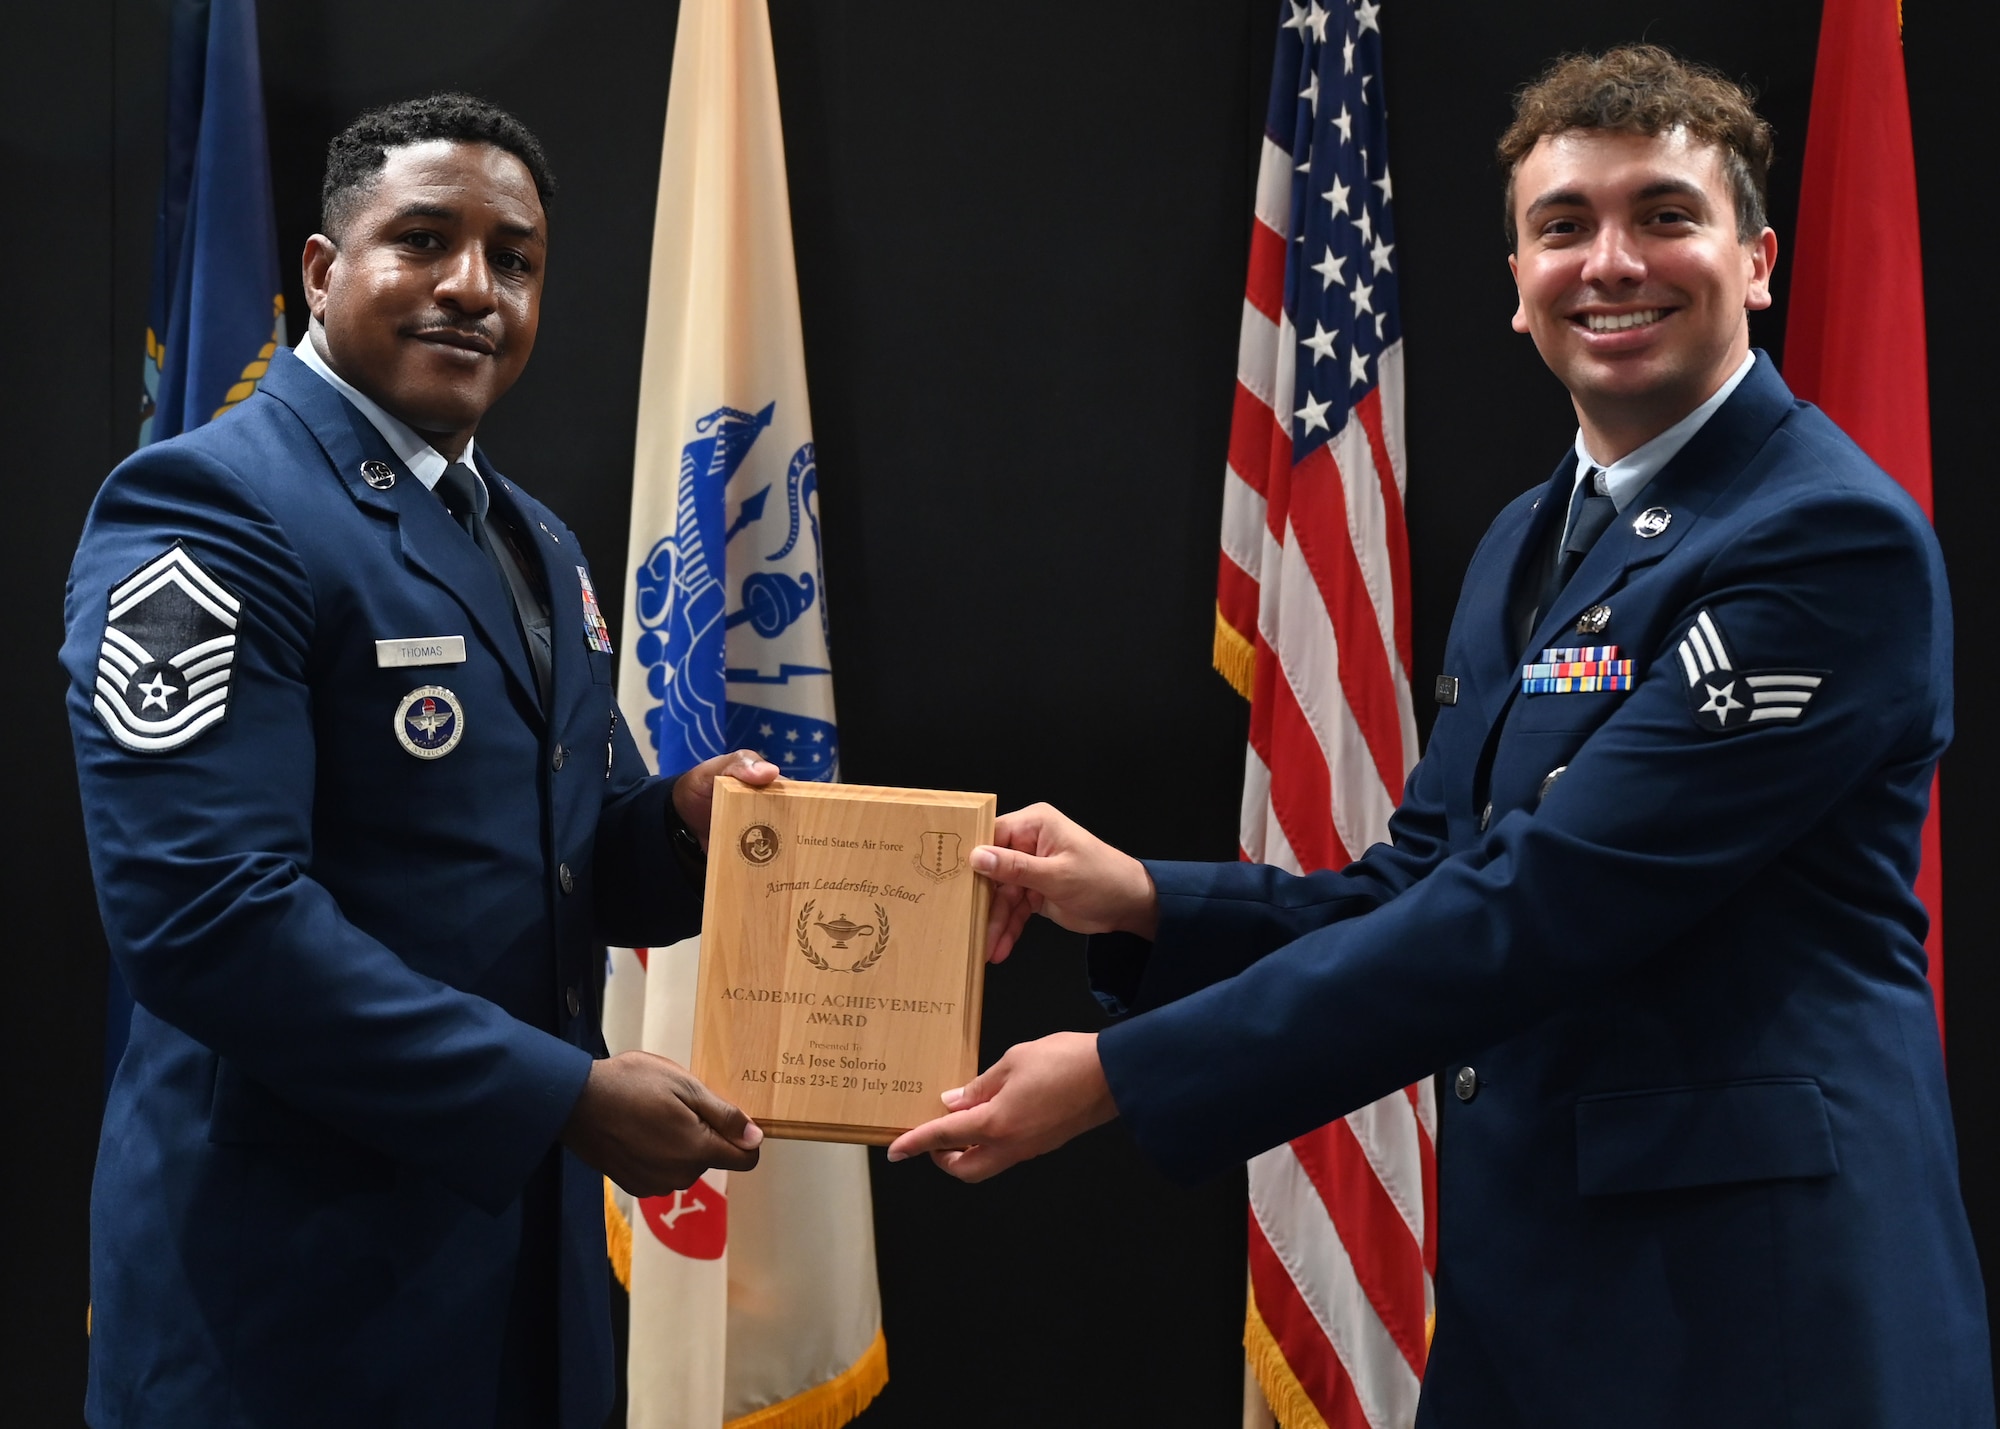 U.S. Air Force Senior Master Sgt. Jarmaine Thomas, 17th Security Forces Squadron senior enlisted leader, presents the Academic Achievement Award to Senior Airman Jose Solorio, Class 23-E Airman Leadership School graduate, at the Class 23-E ALS graduation in the Powell Event Center, Goodfellow Air Force Base, Texas, July 20, 2023. This award is given to the student who demonstrated academic excellence in all performance tasks and the capstone exercise. (U.S. Air Force photo by Senior Airman Ethan Sherwood)